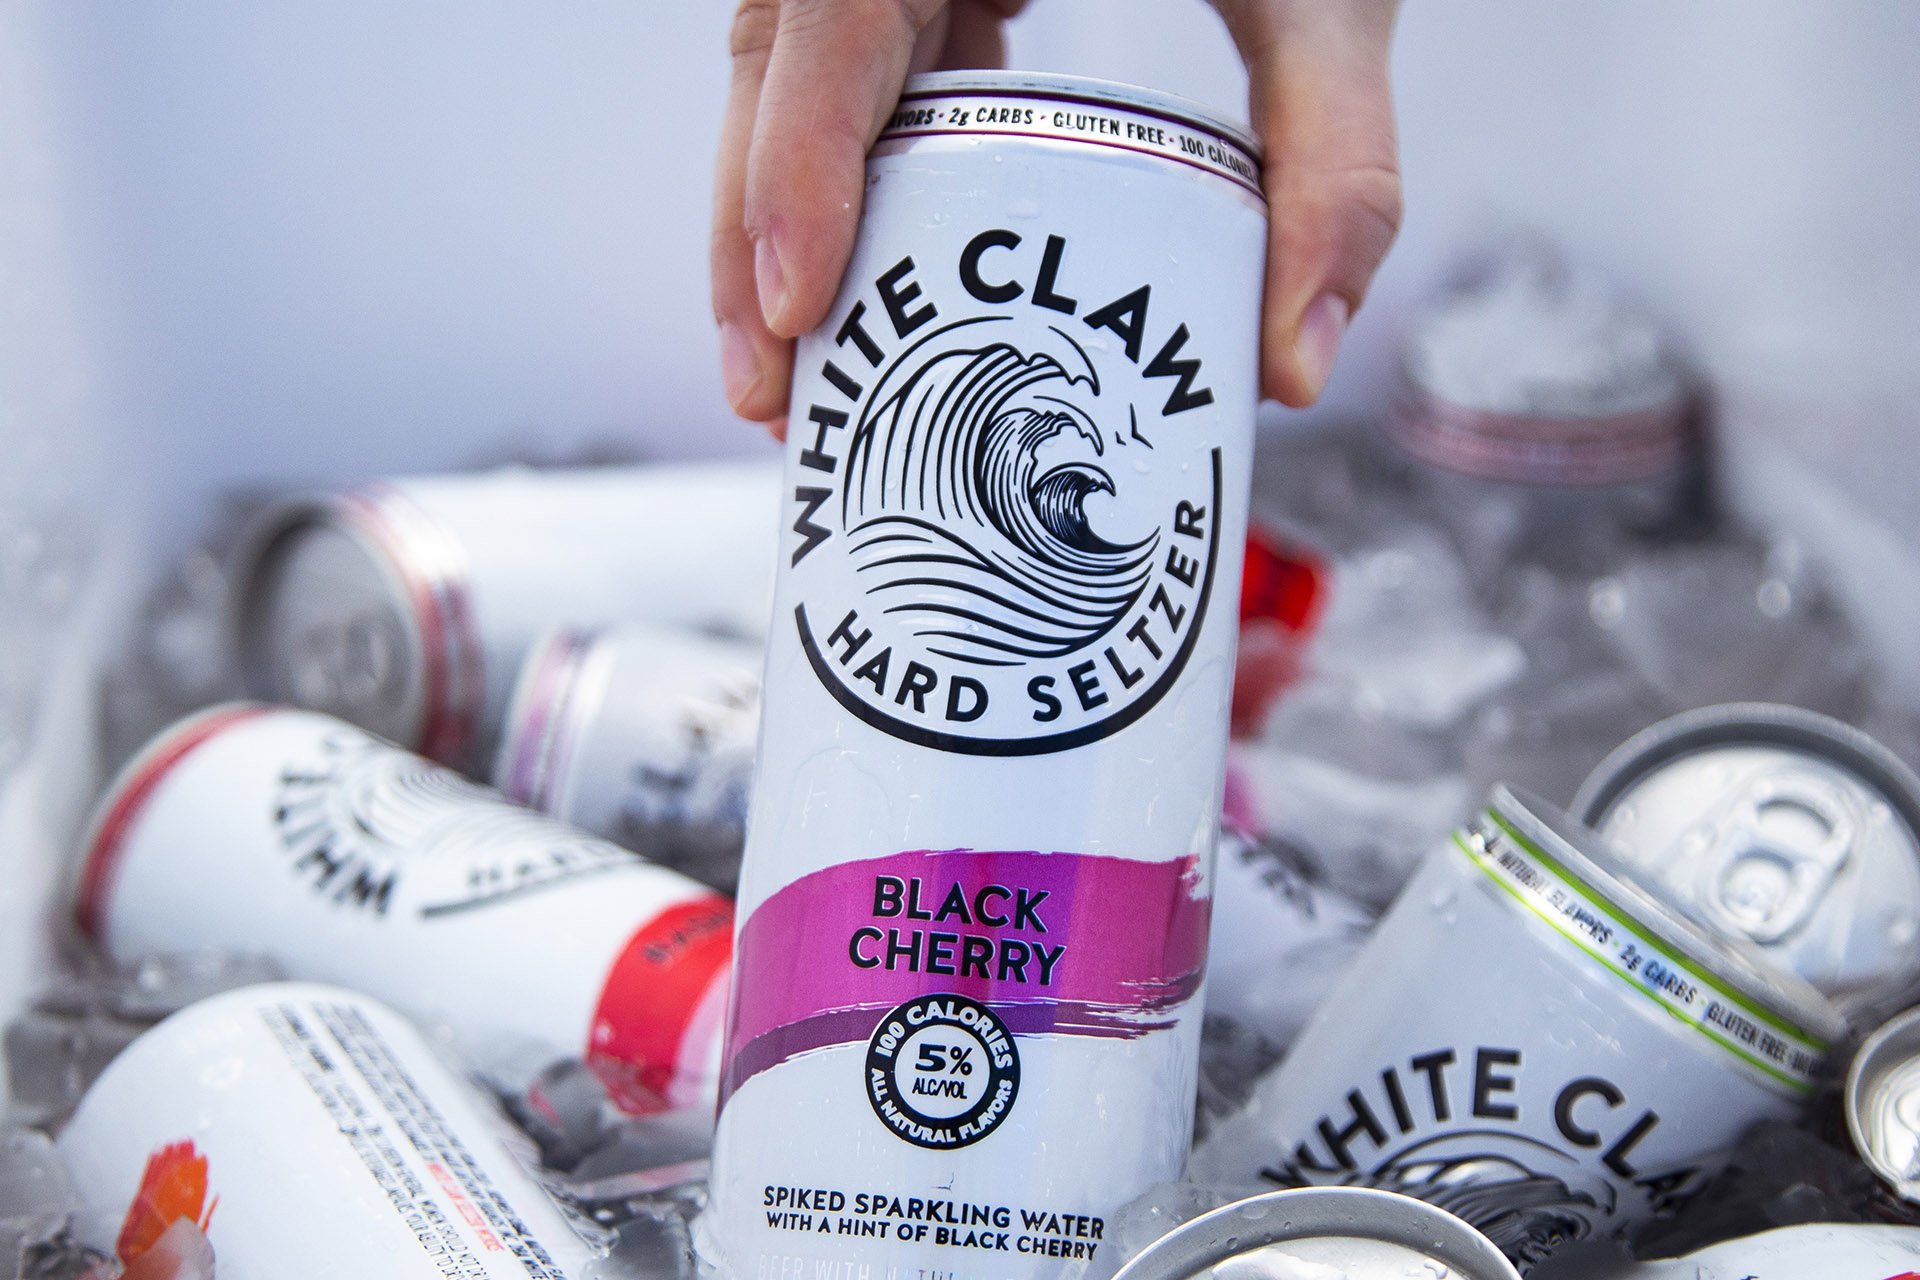 Behind the Meteoric Rise of Hard Seltzer